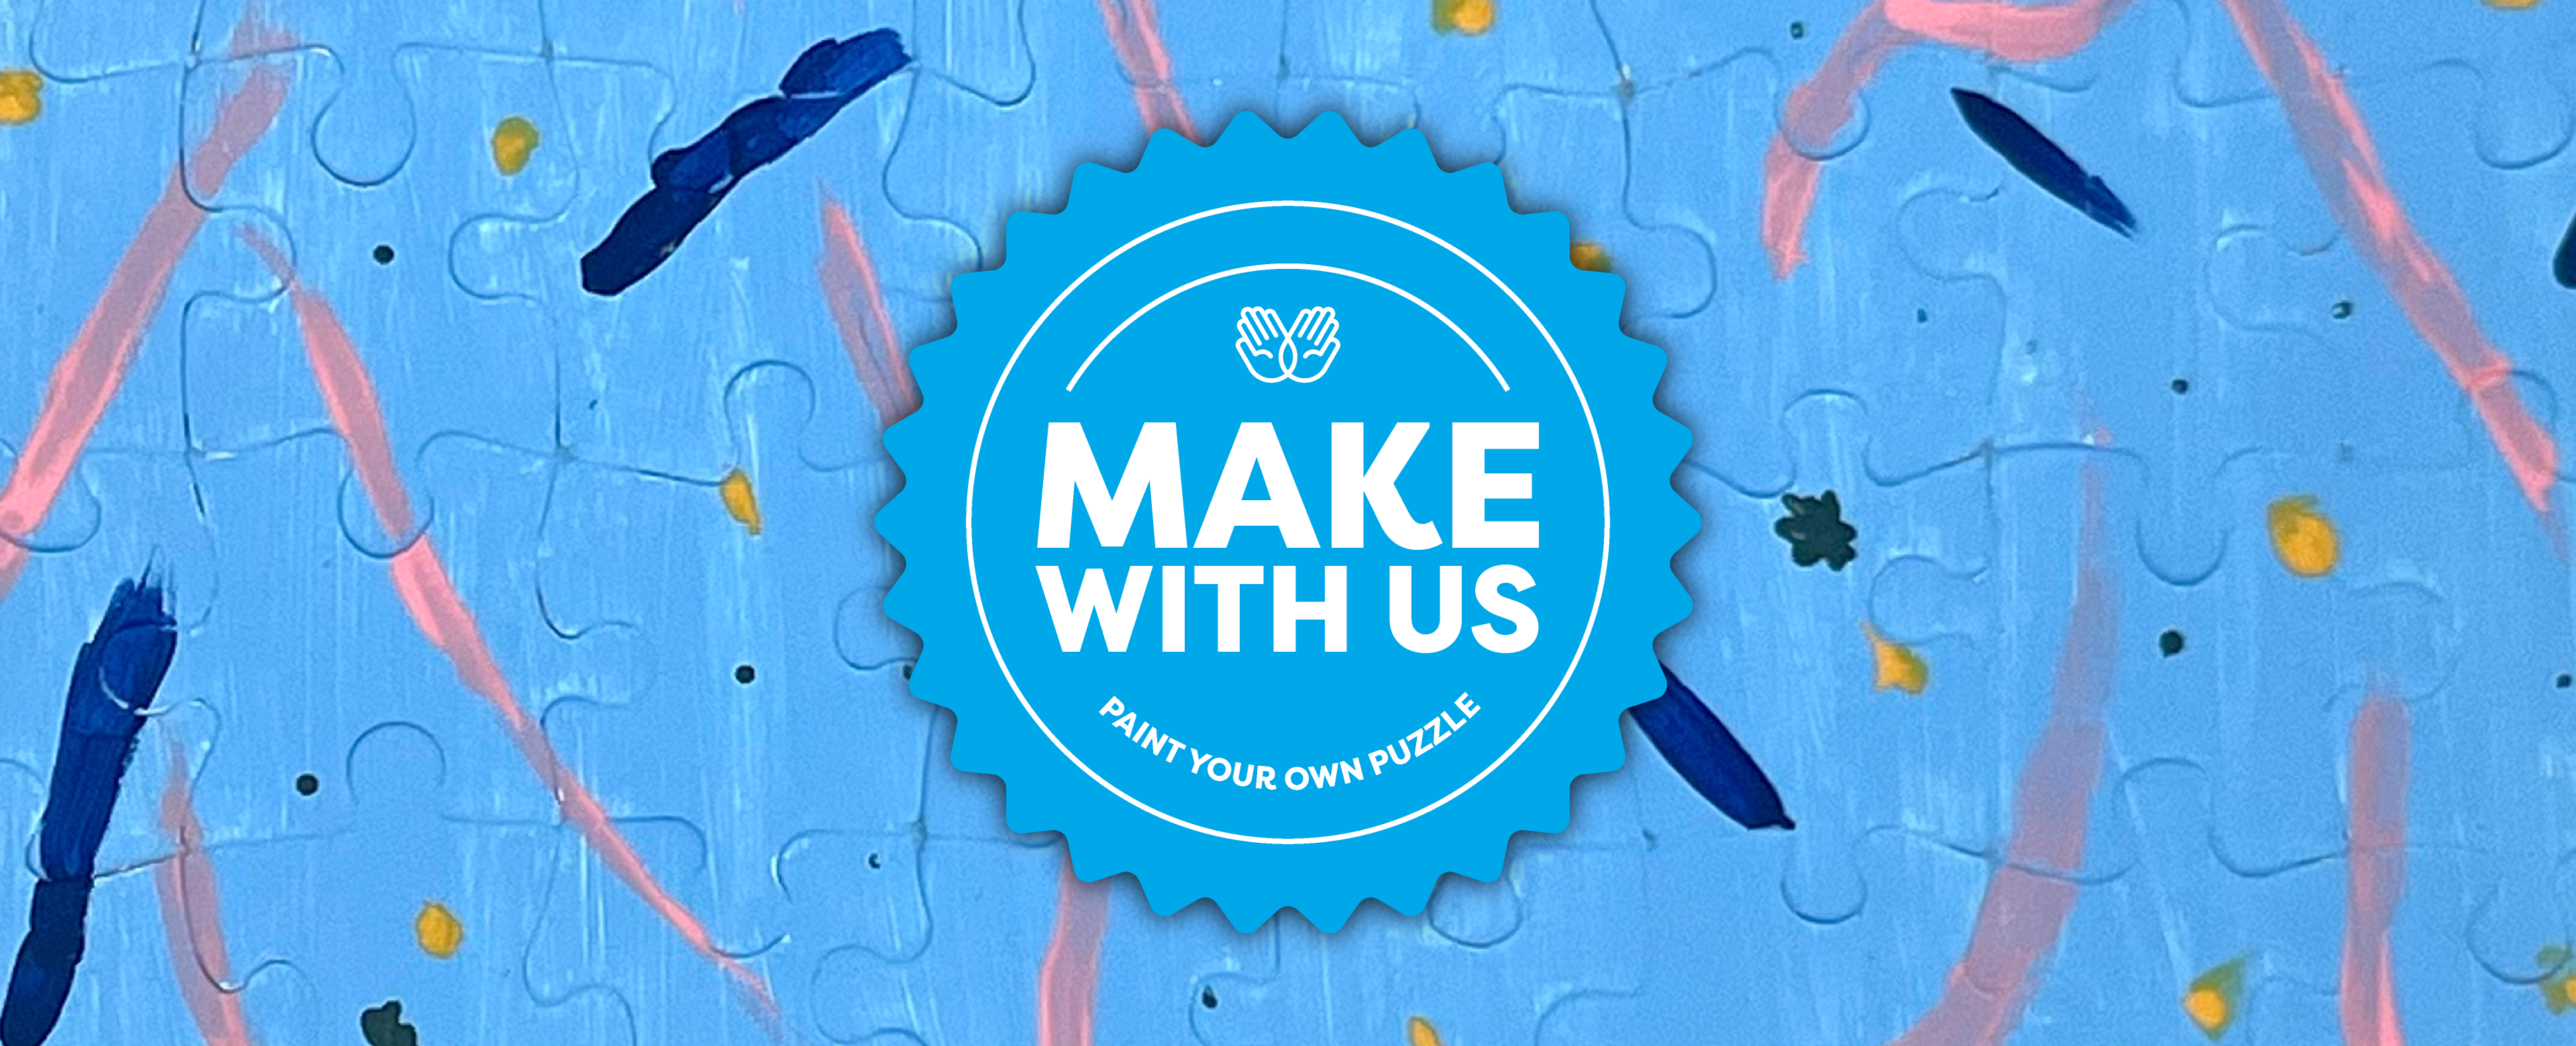 Make With Us: Paint Your Own Puzzle